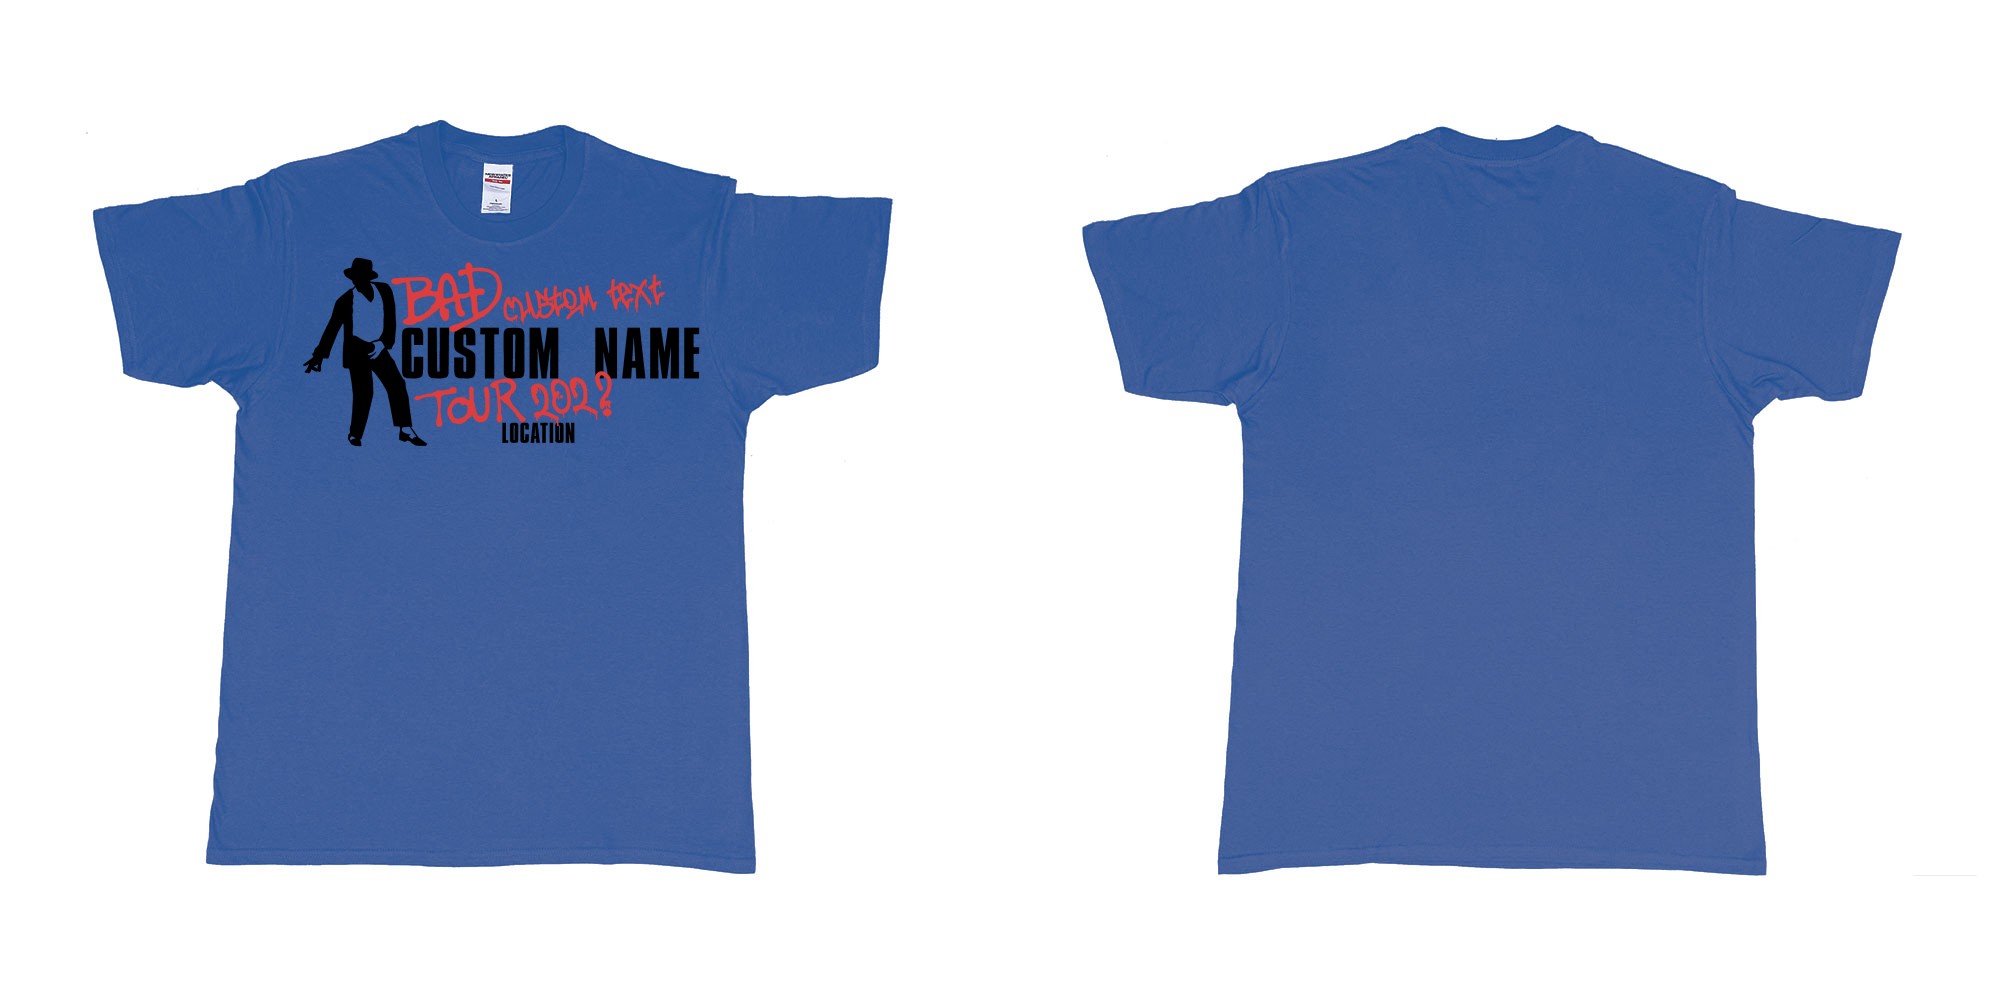 Custom tshirt design michael jackson bad tour custom name year location in fabric color royal-blue choice your own text made in Bali by The Pirate Way